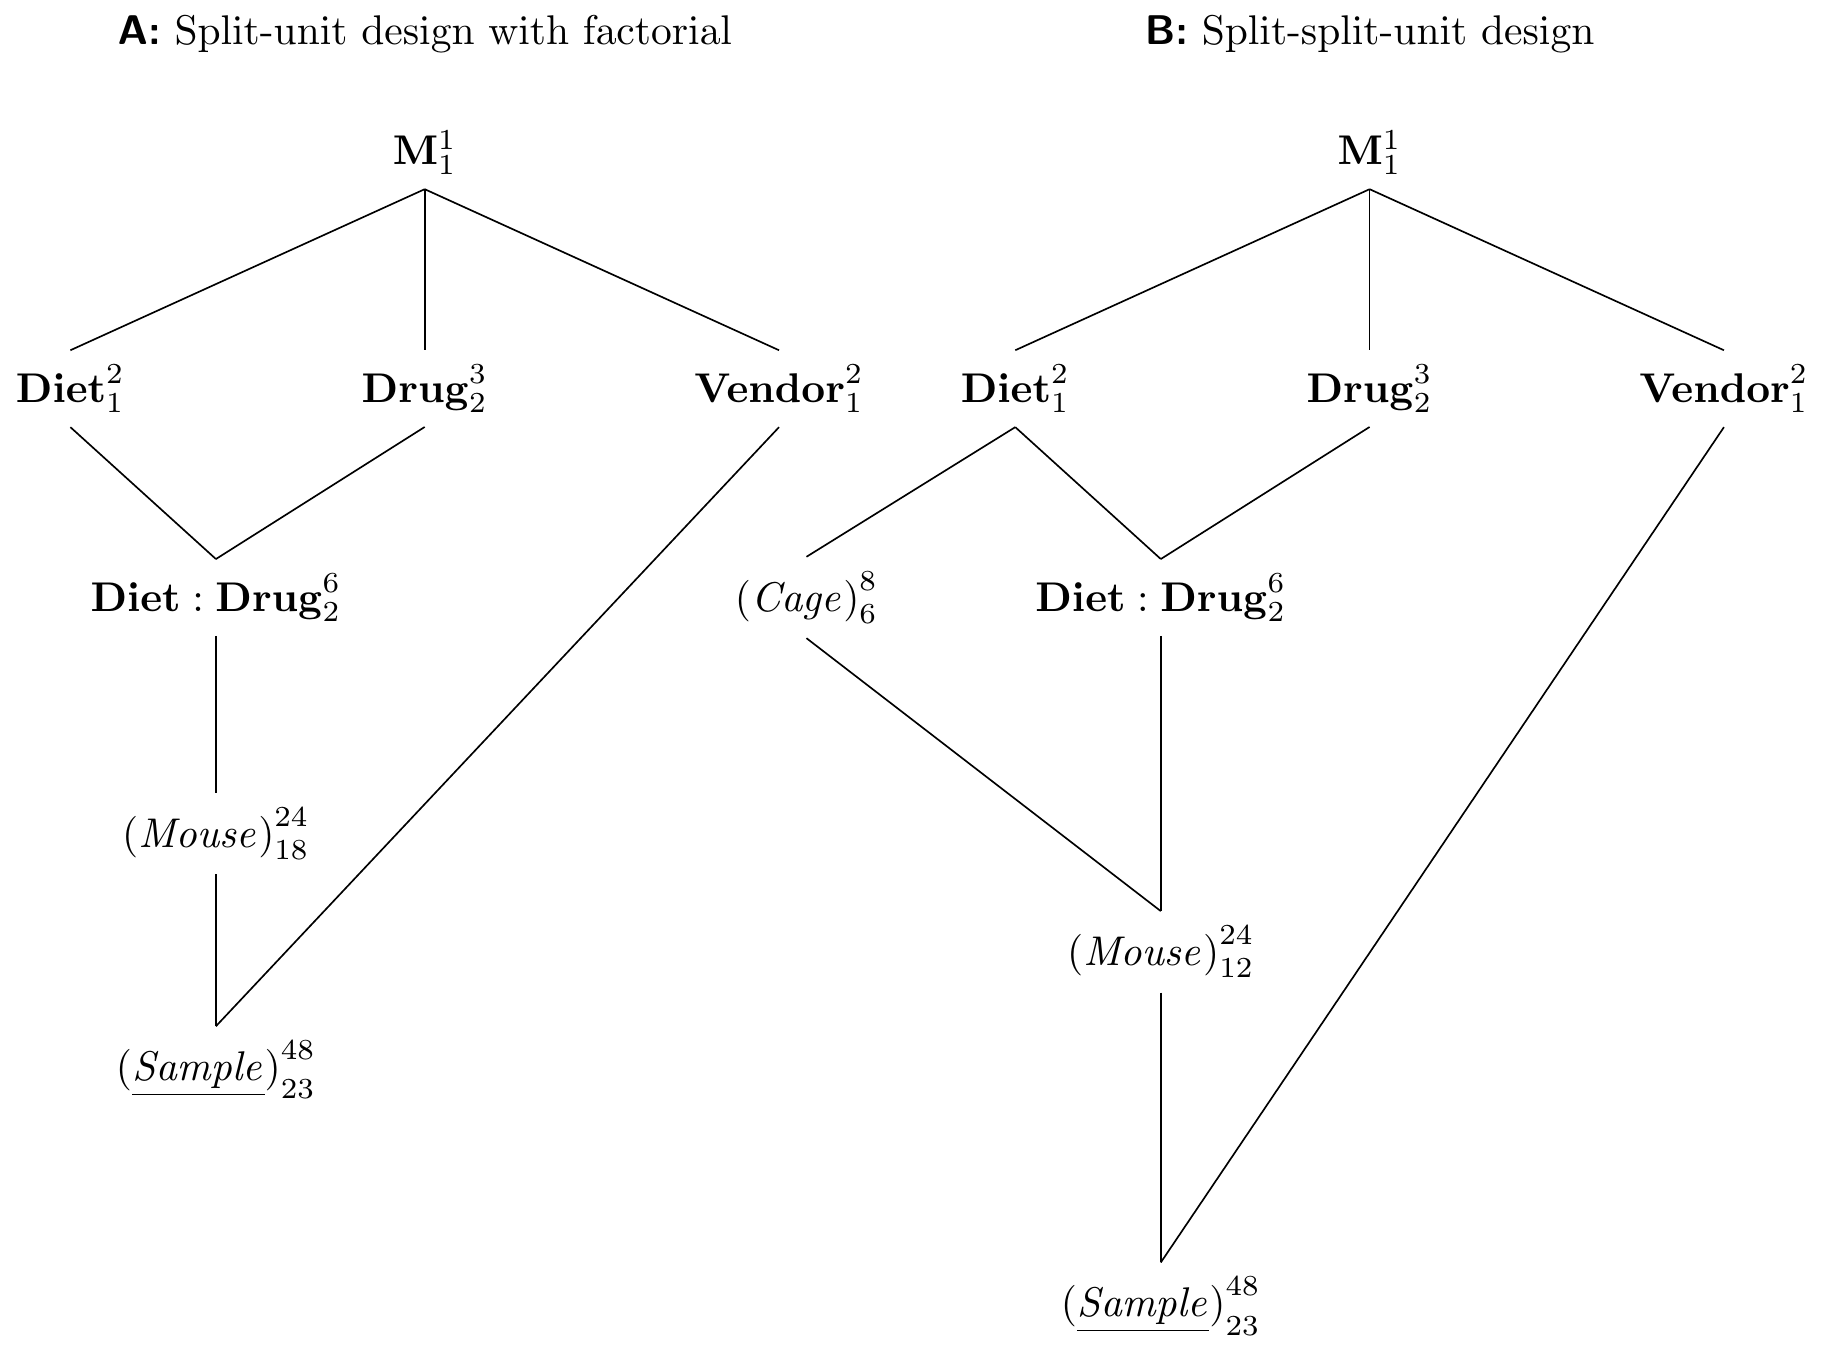 A: Split-unit design with diets and drugs completely randomized on mice as a CRD and vendor randomized on samples. B: Same treatment structure with split-split-unit design.